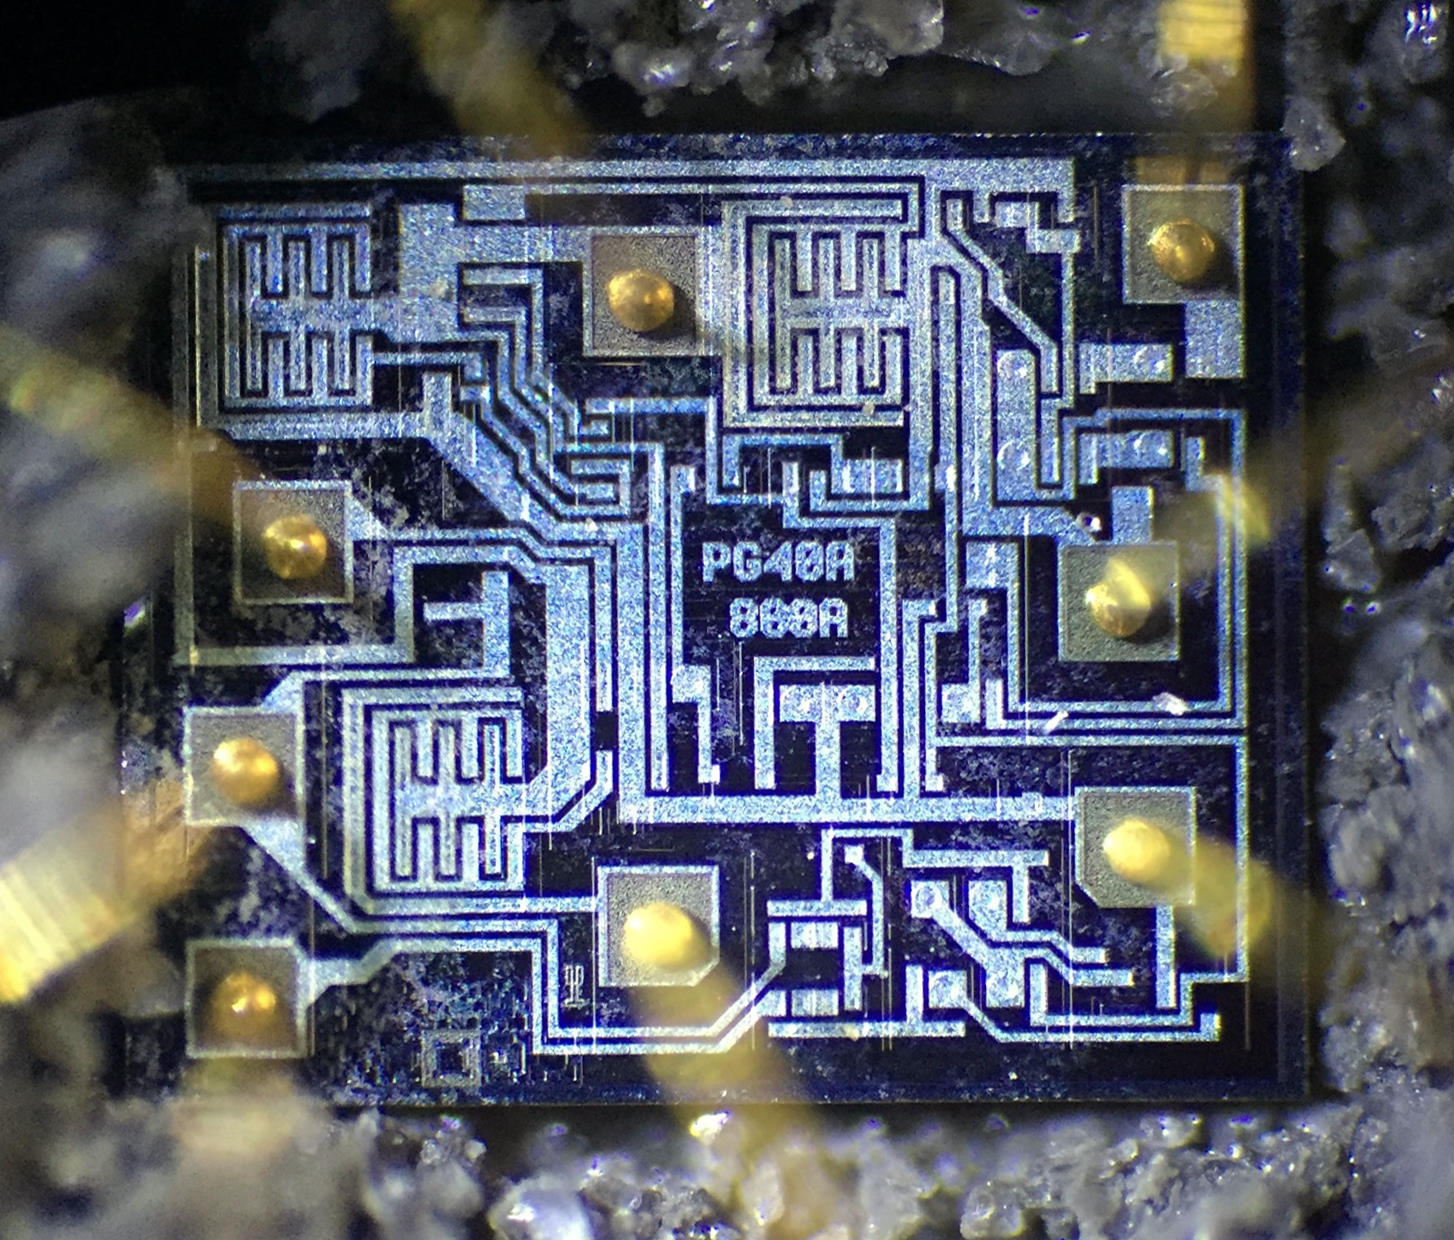 Micro: 555, Fully exposed silicon die, intact wire bonds